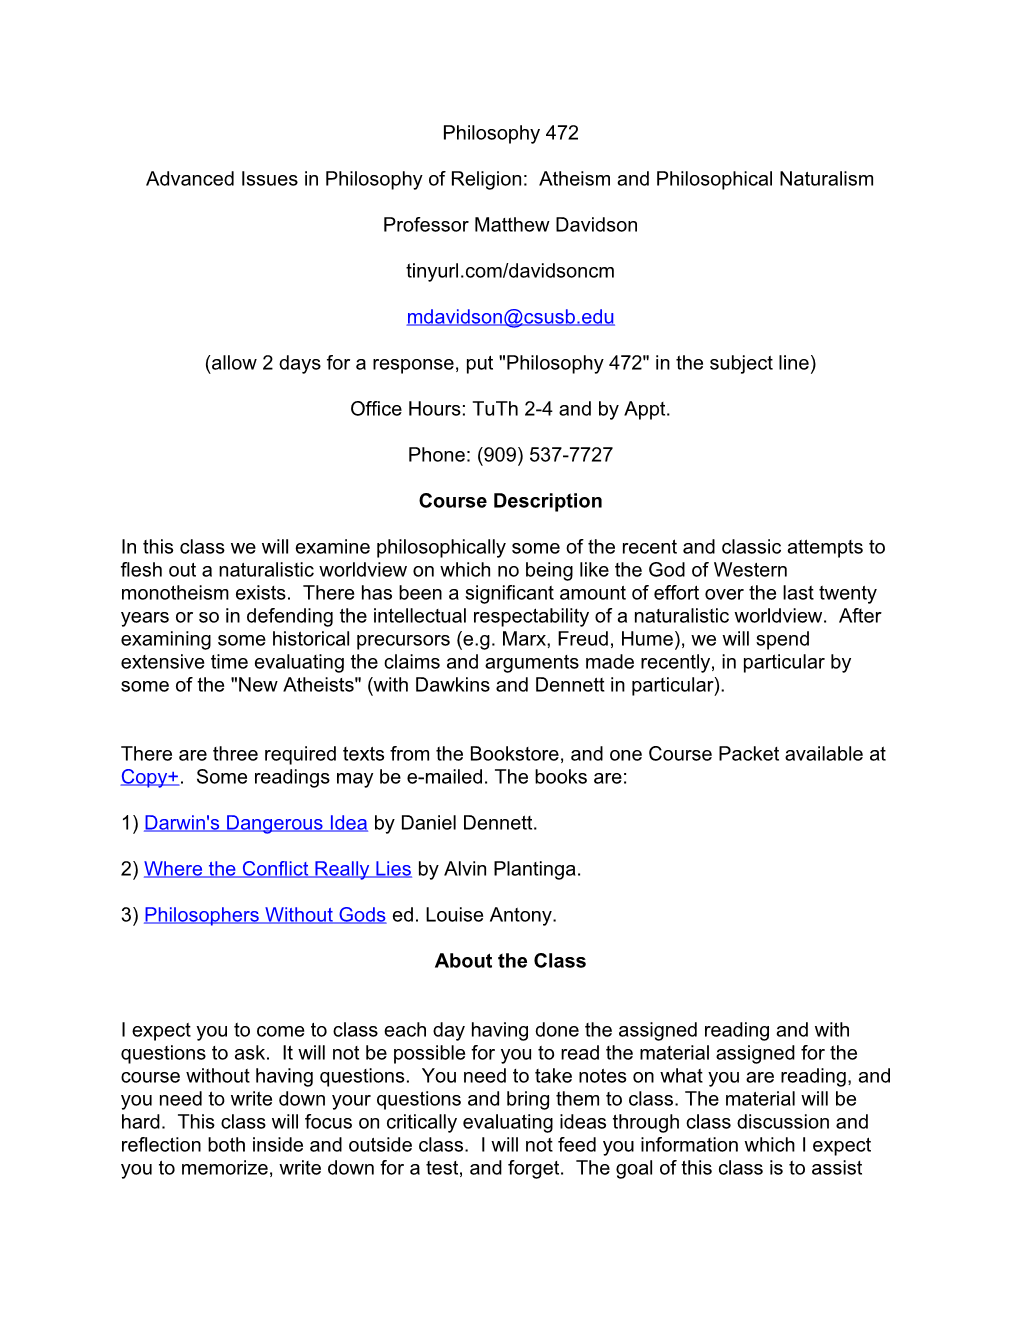 Advanced Issues in Philosophy of Religion: Atheism and Philosophical Naturalism